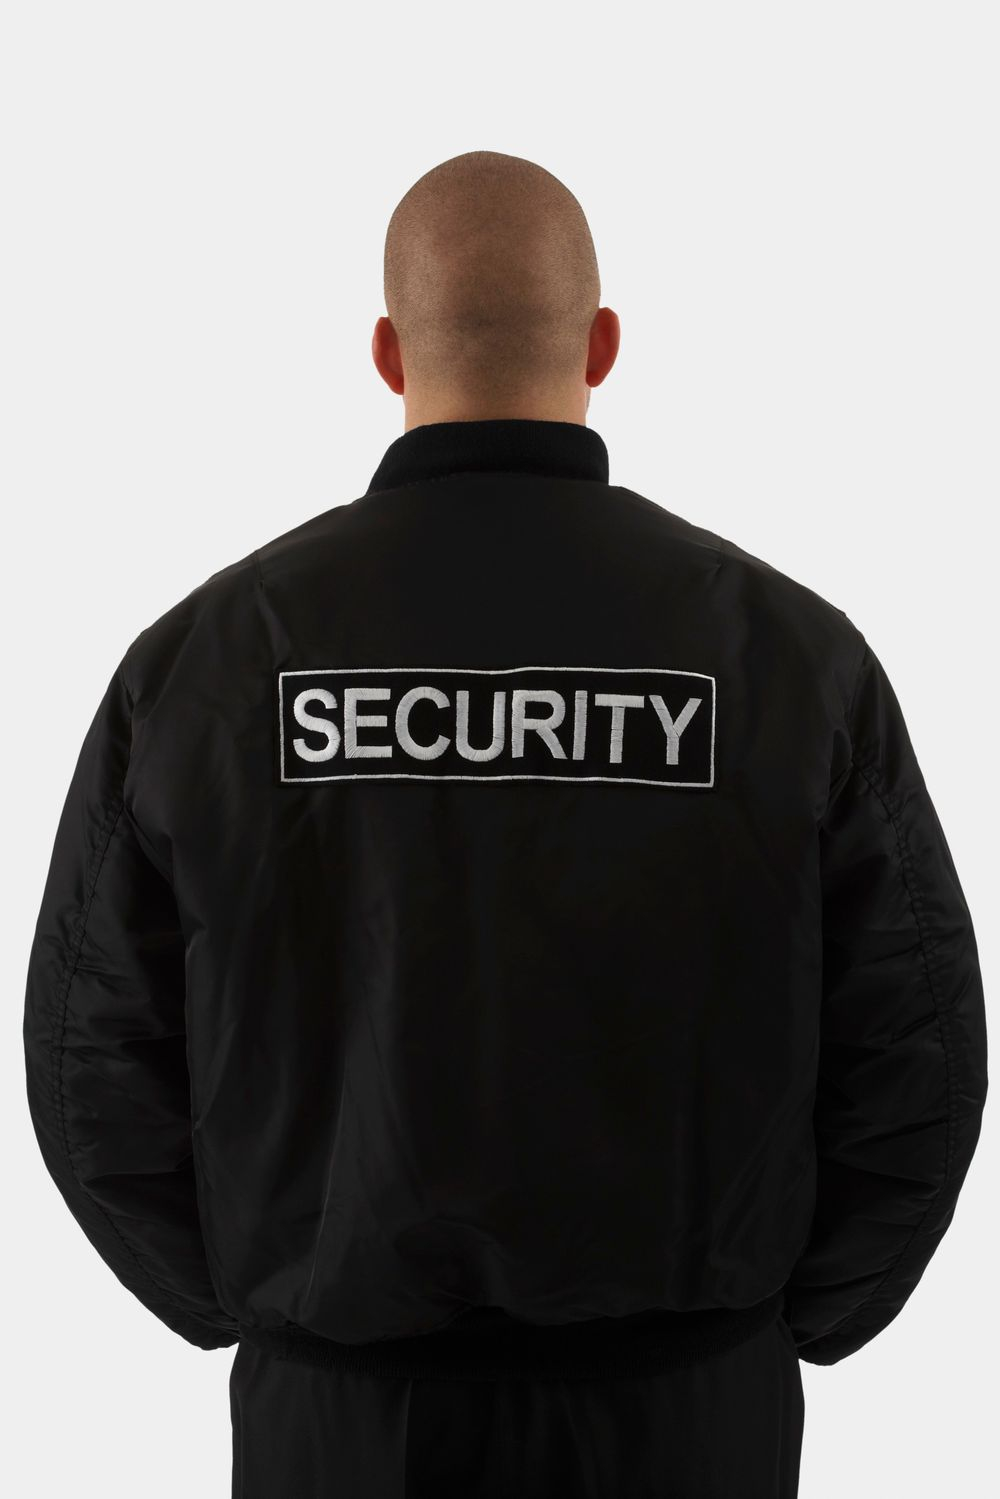 Event security planning in Los Angeles